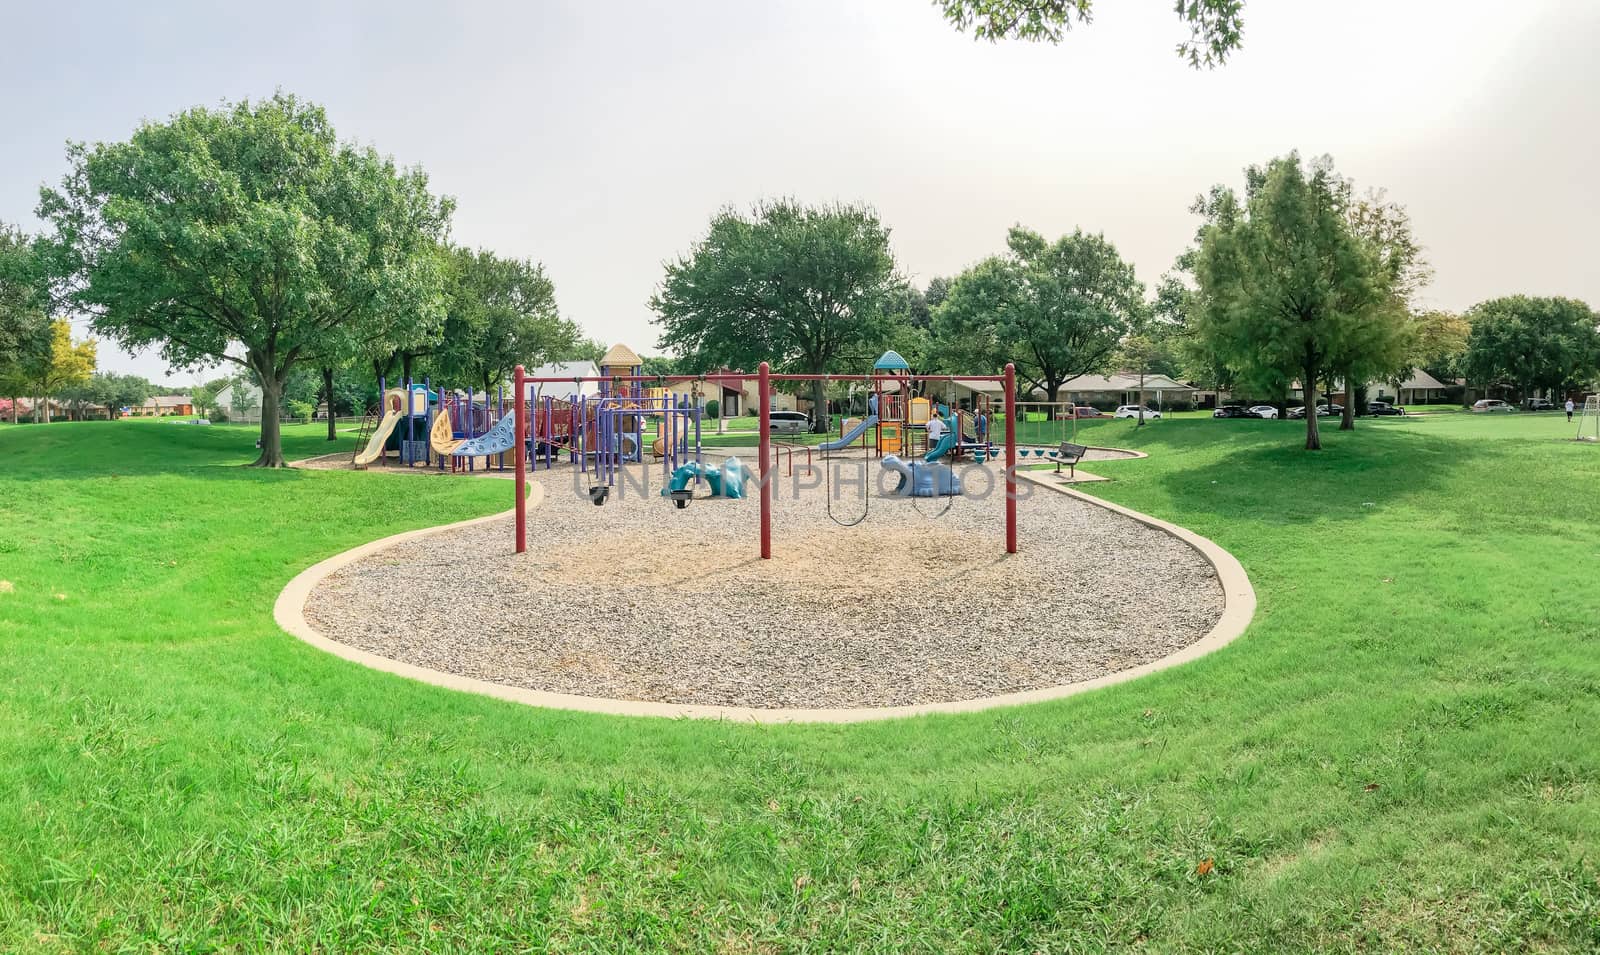 Swing set at large playground in residential neighborhood near Dallas, Texas, America. Community park with row of single family houses in background